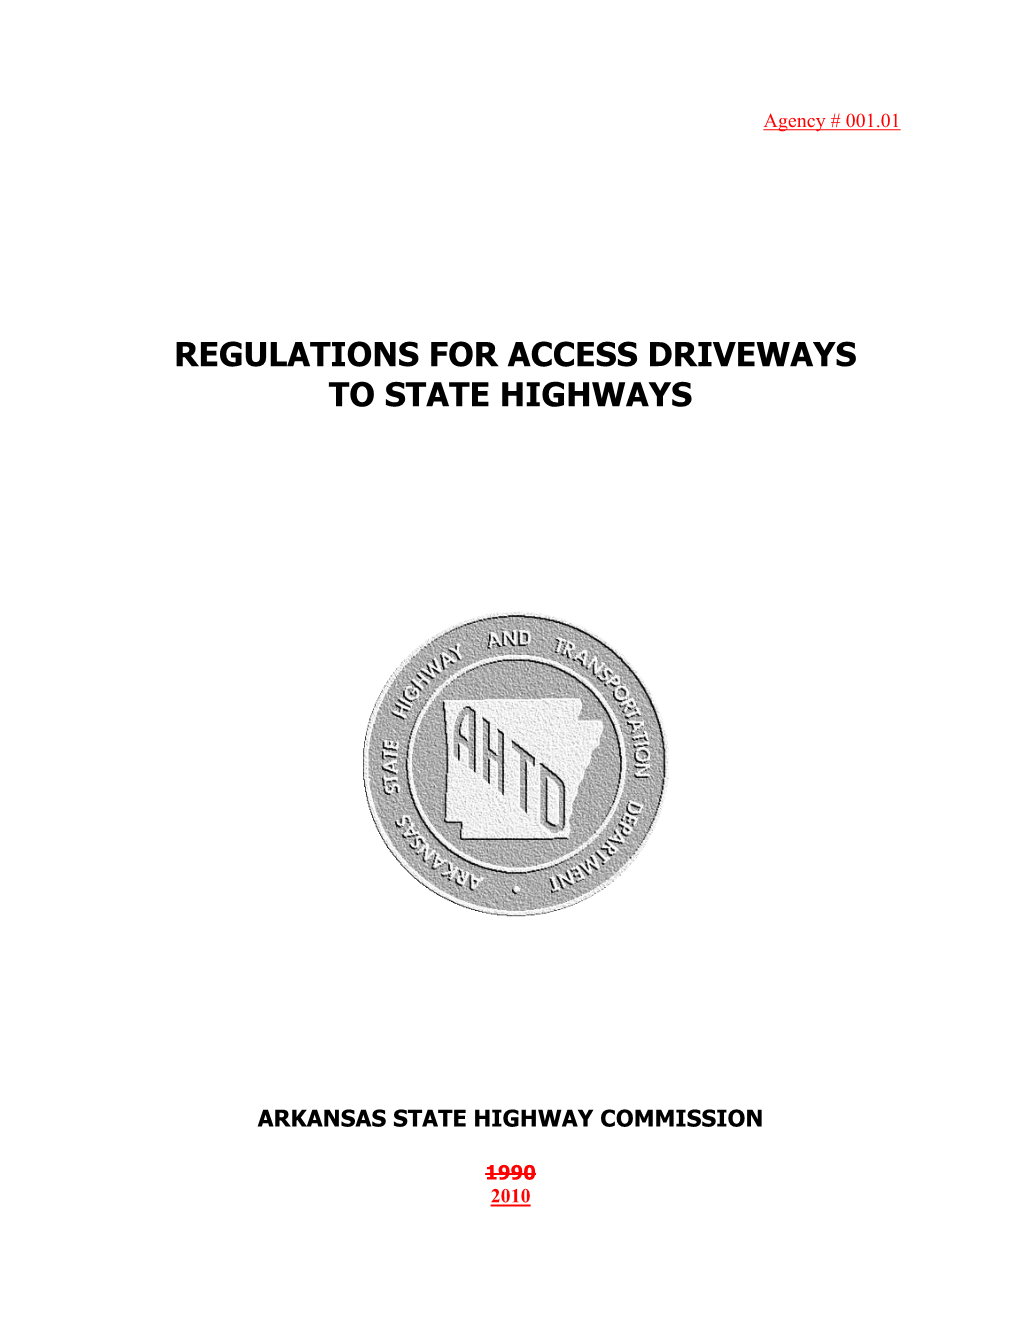 Regulations for Access Driveways to State Highways